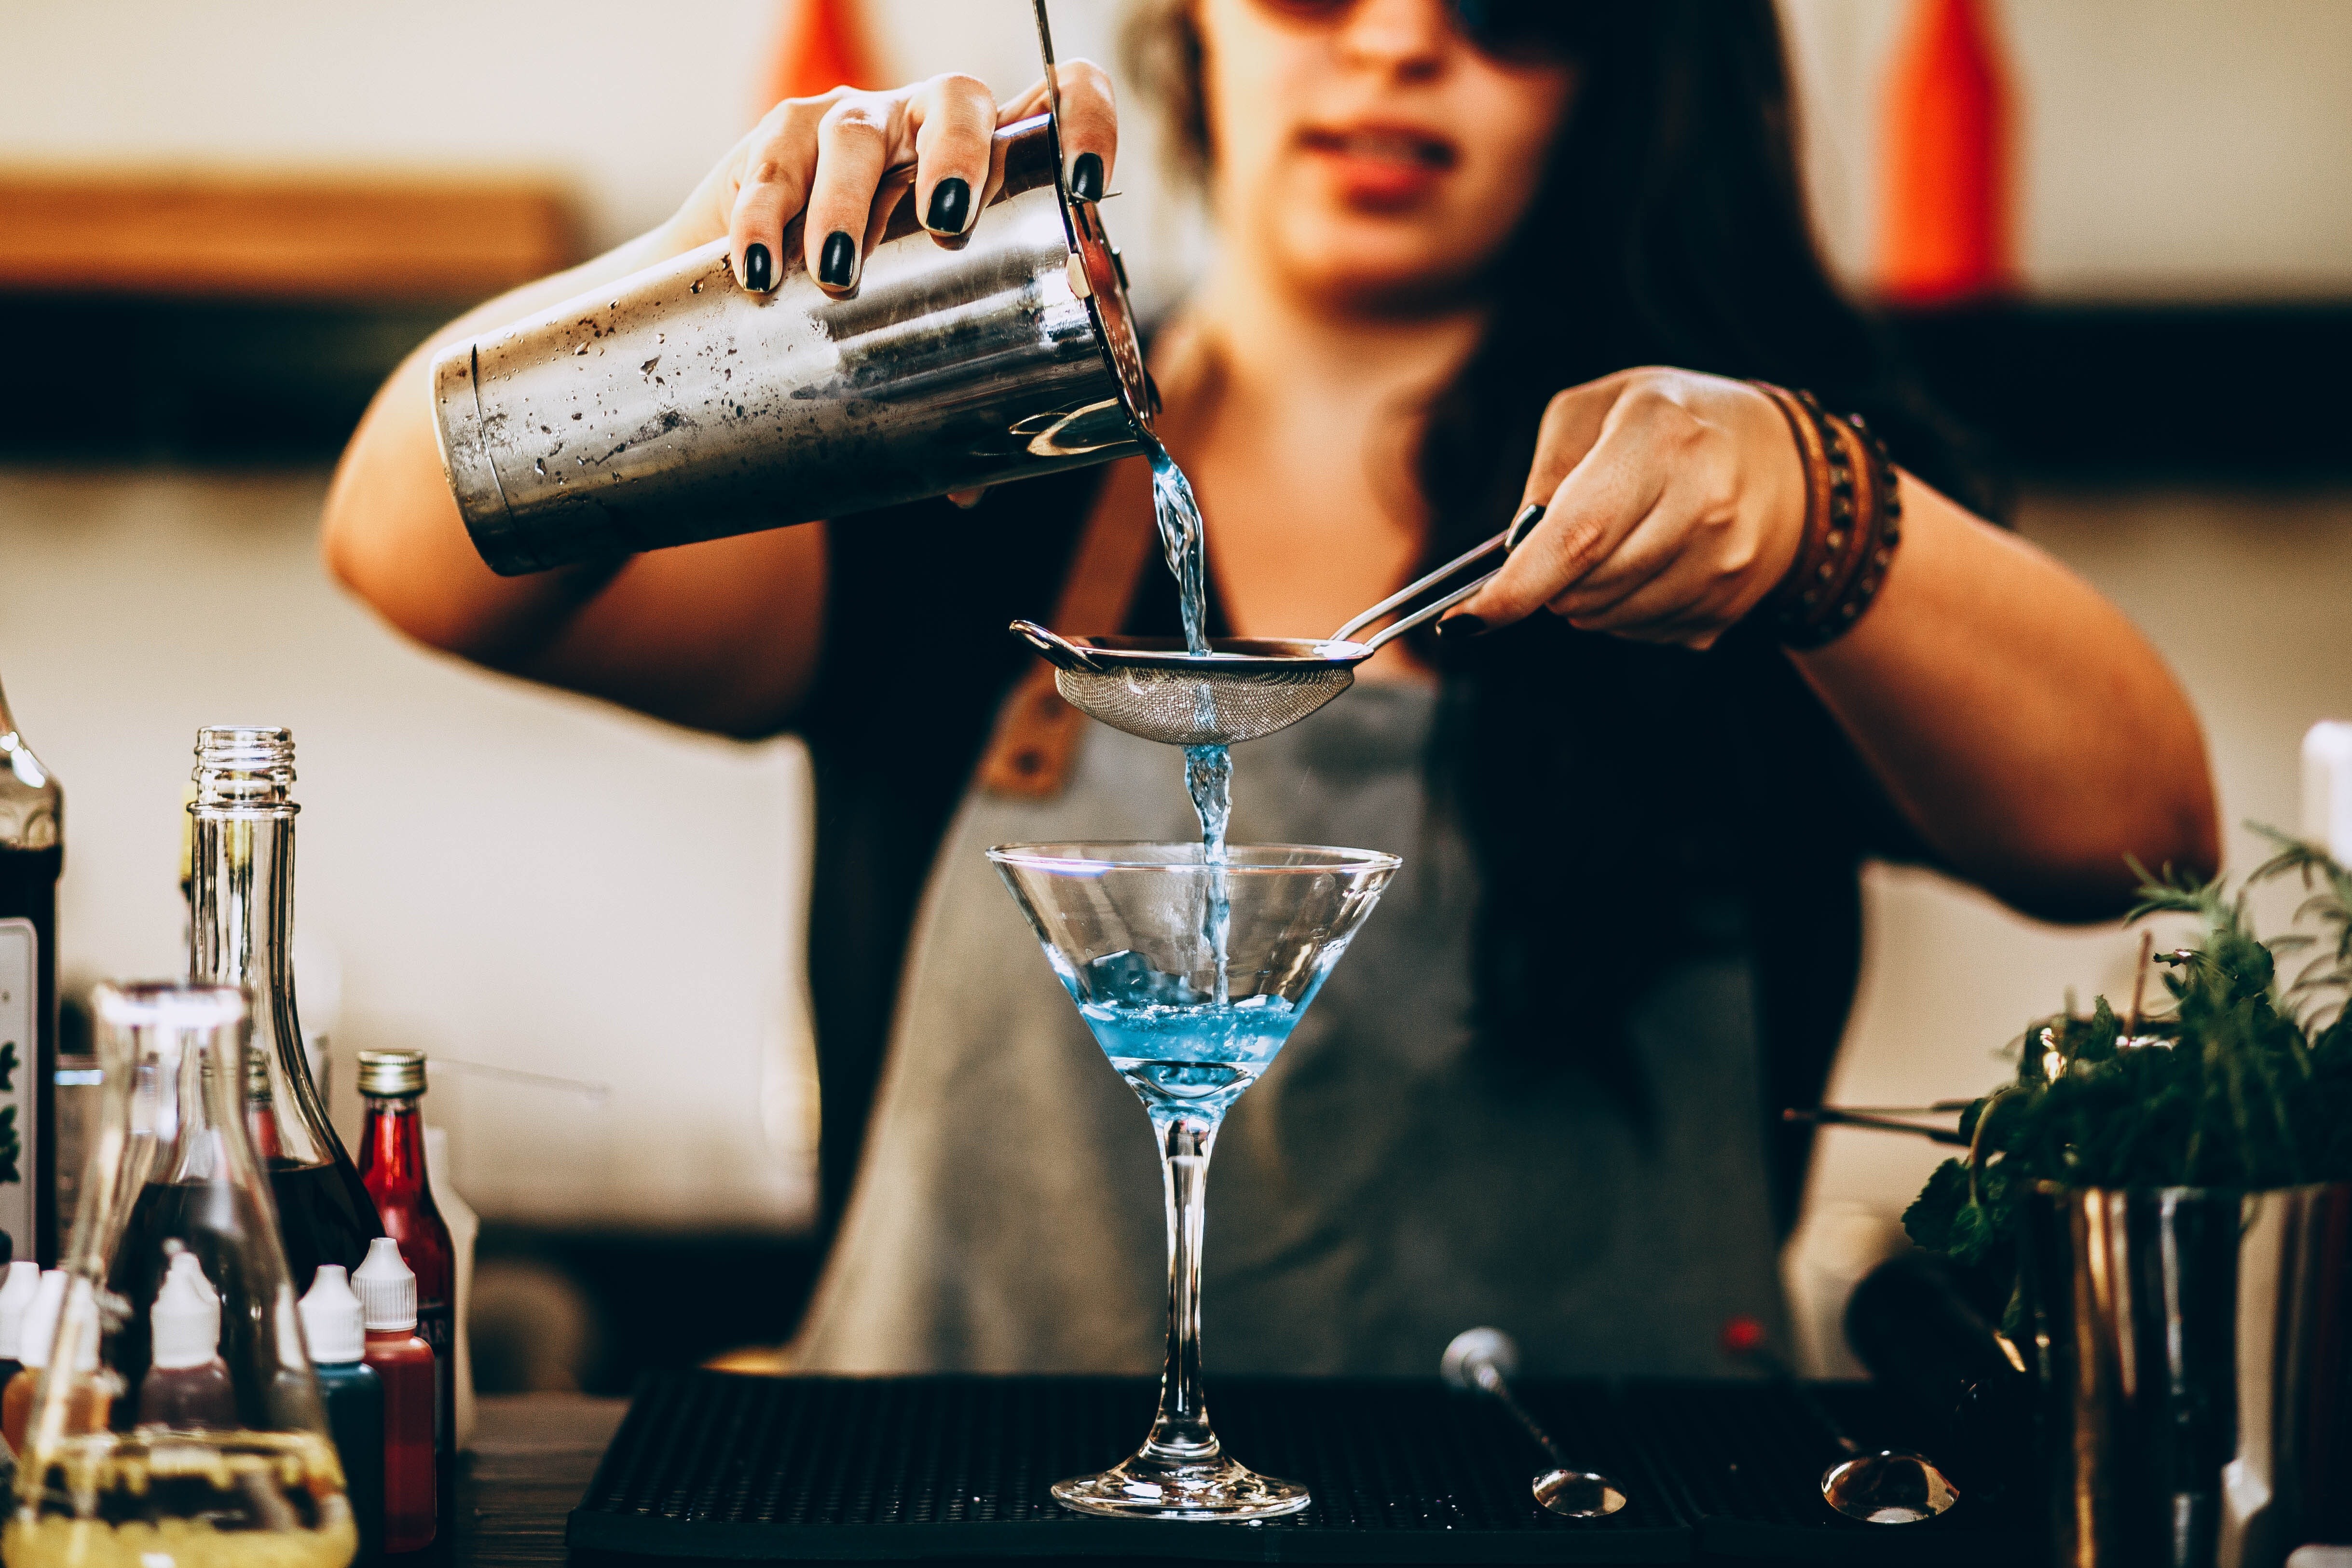 Craving your favourite cocktail or delicious dish? We asked worldwide chefs and mixologists for some menu ideas. Photo: Pexels